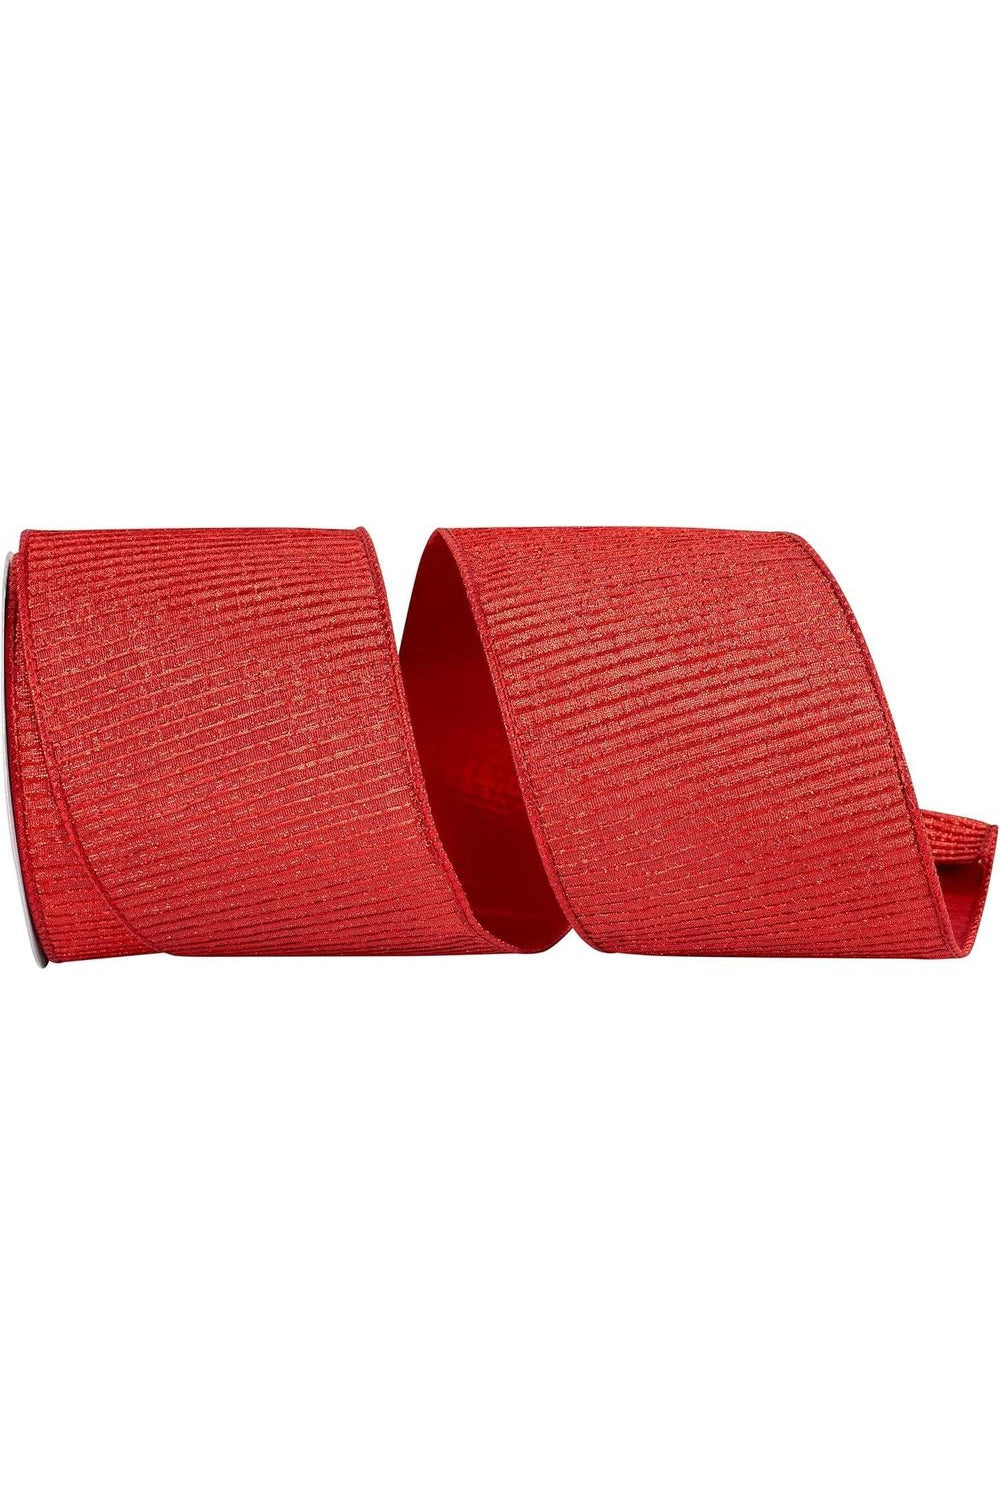 Shop For 4" Pleated Metallic Lux Ribbon: Red (10 Yards) 92896W-065-10F